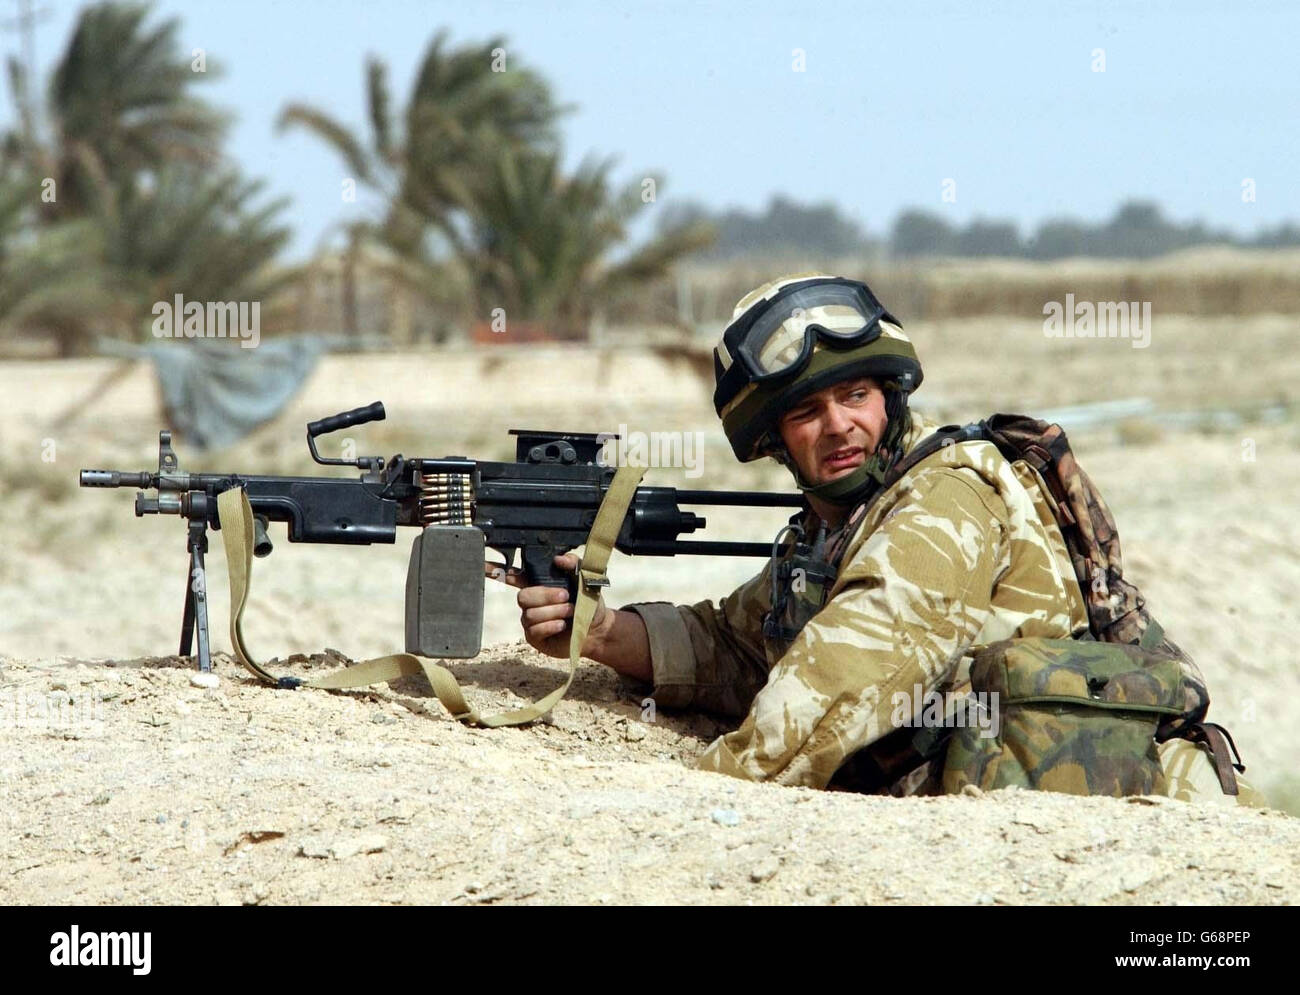 A member of the Light Infantry operating alongside the British 2nd Royal Tank Regiment secures a position near Basra. Stock Photo